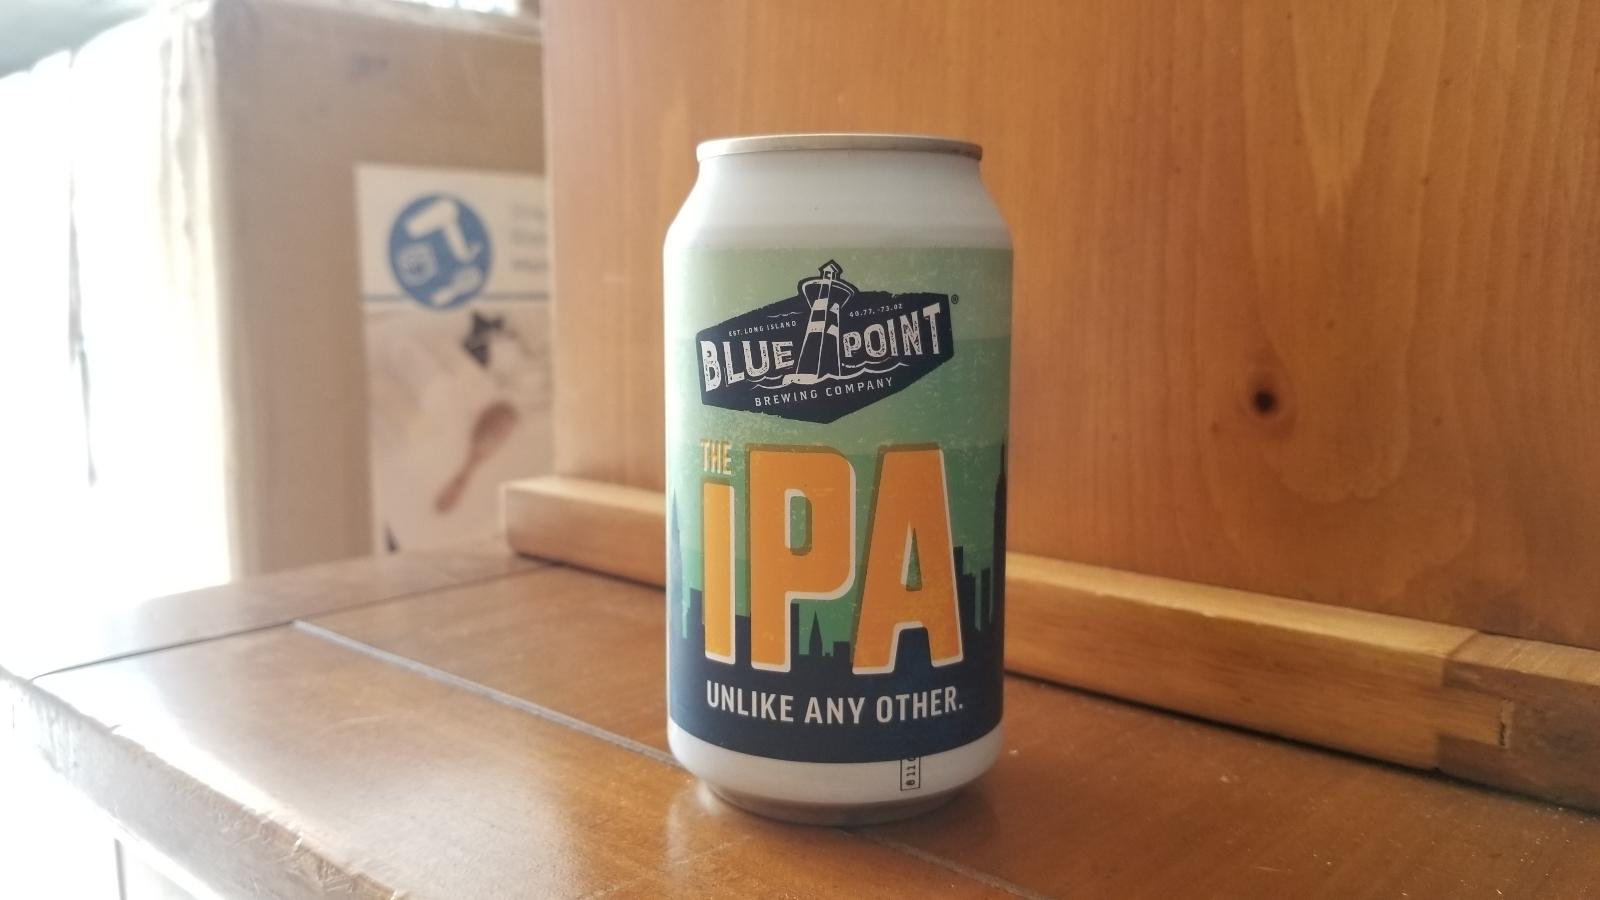 The IPA Unlike Any Other